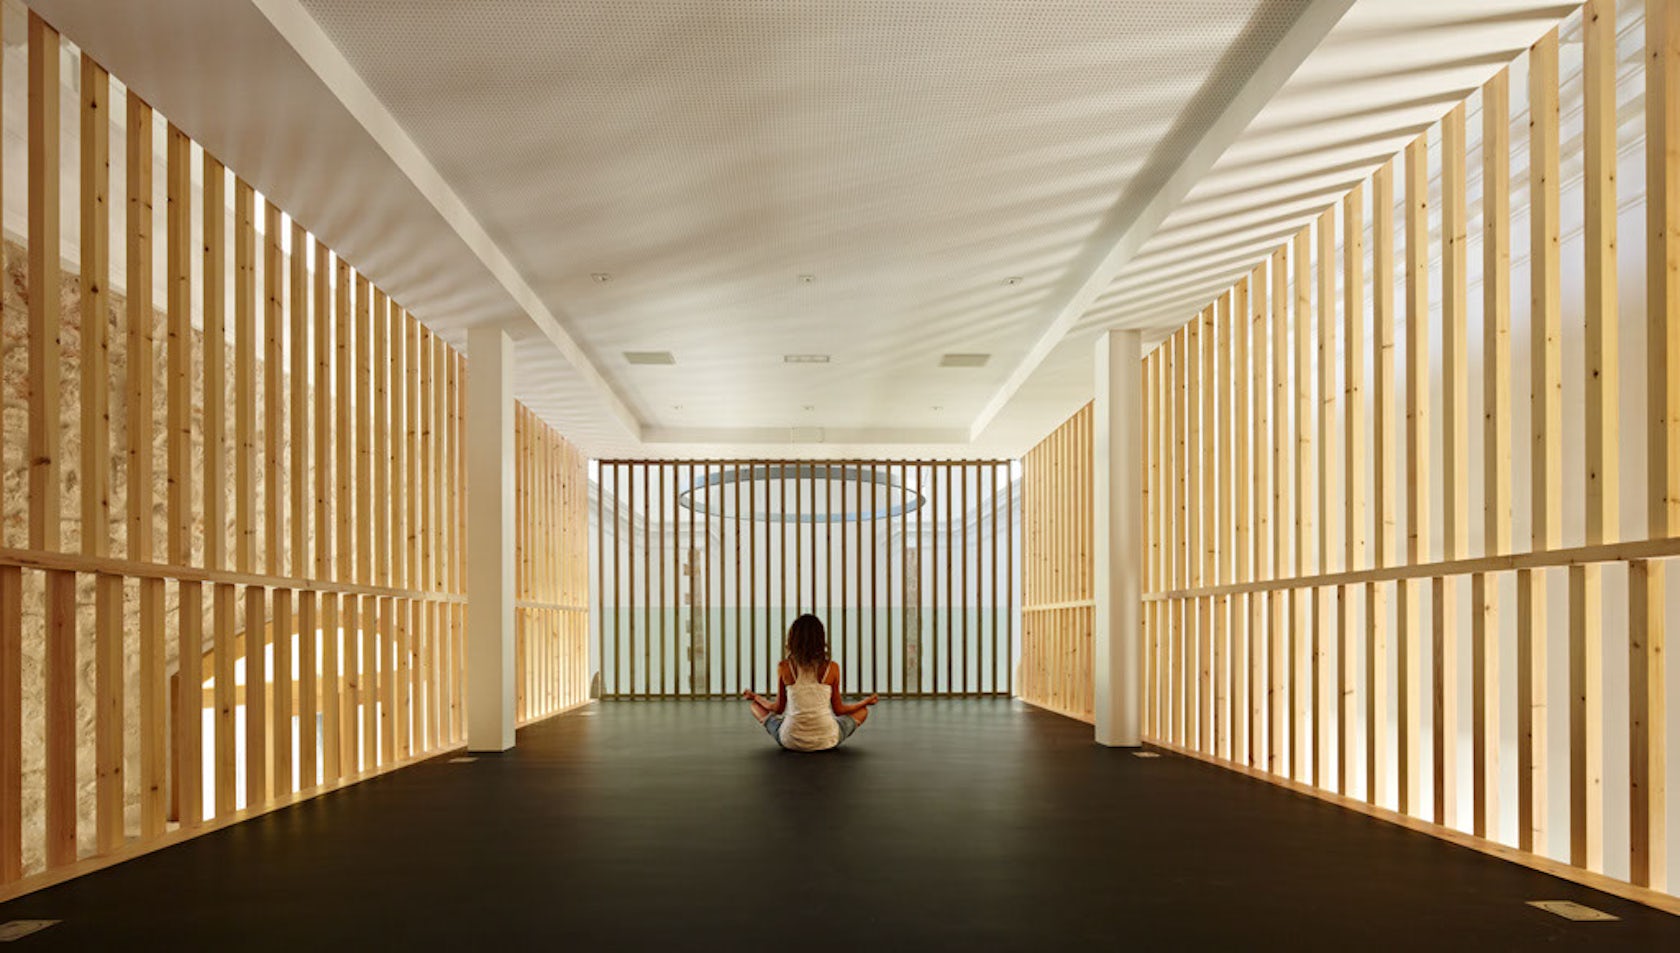 The Architecture of Ayurveda: 6 Contemporary Spaces for Yoga